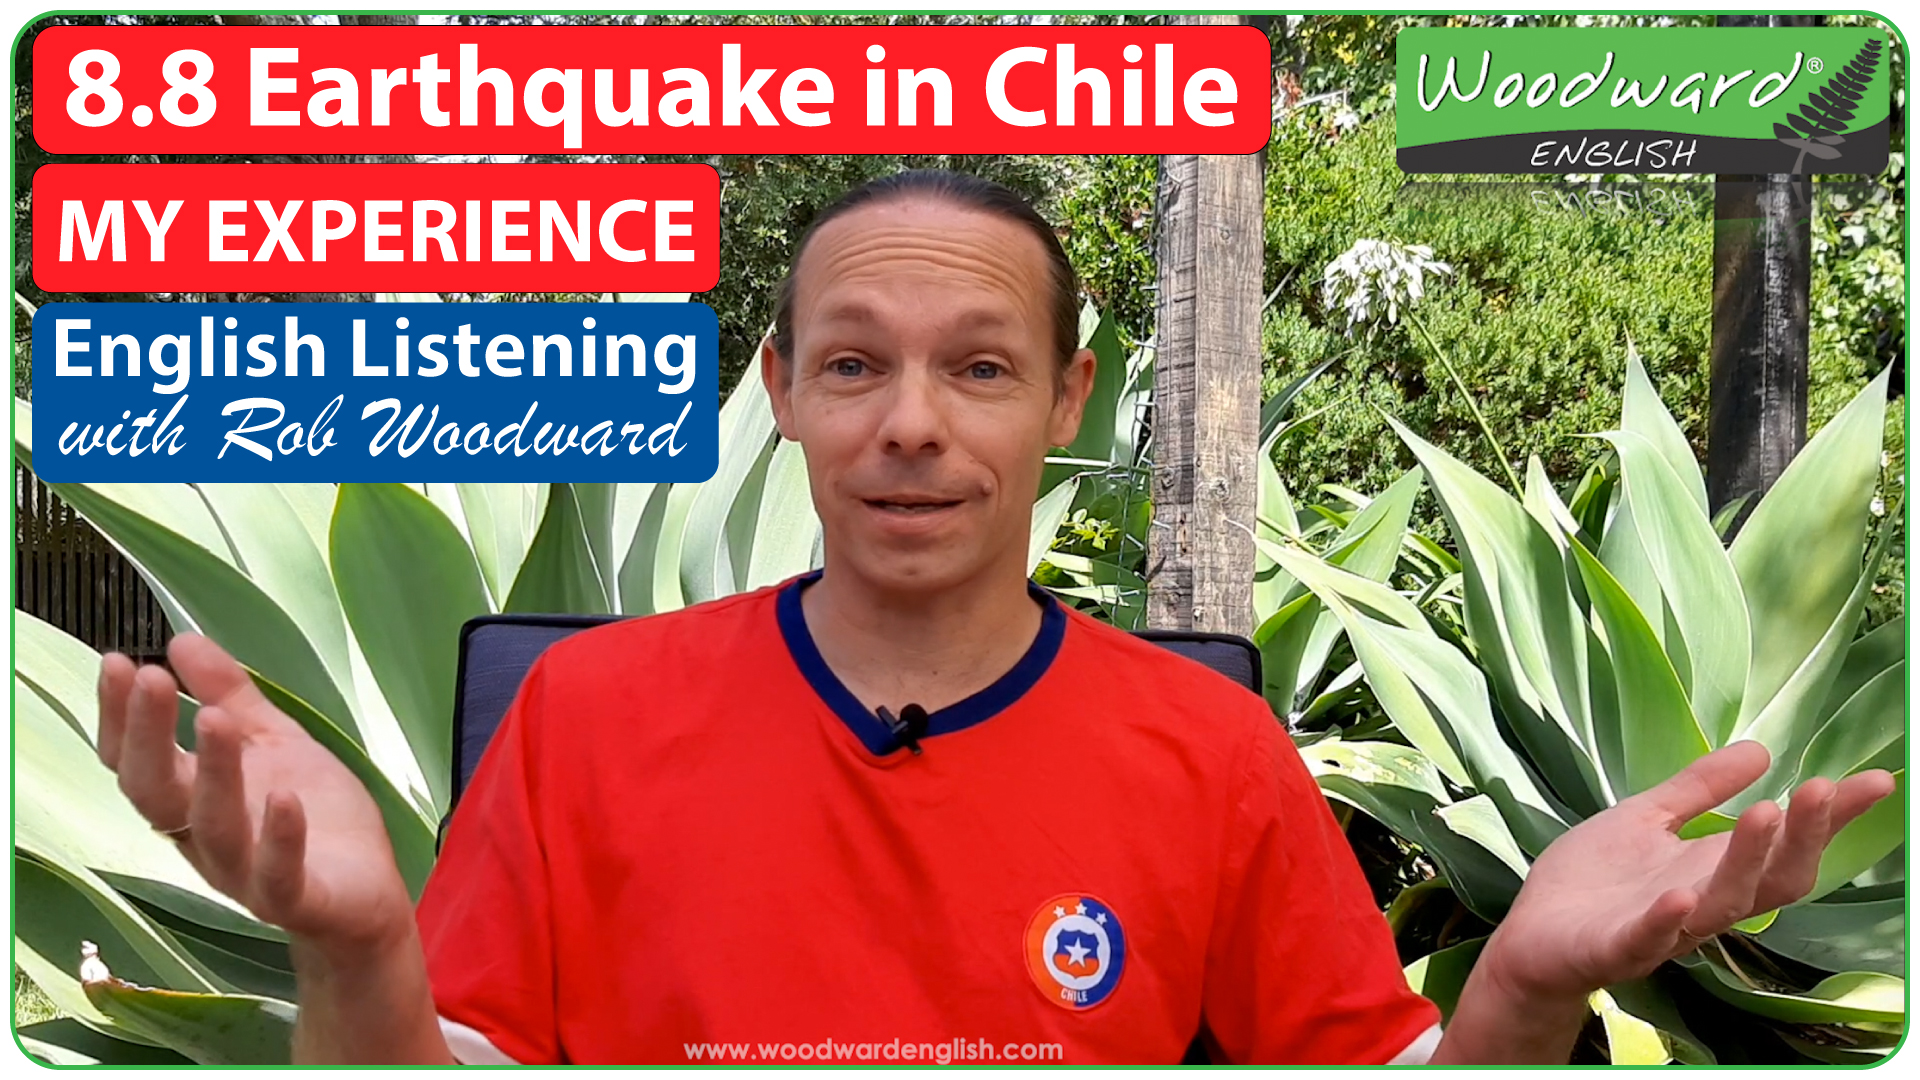 Chile 8.8 Earthquake experience - English listening